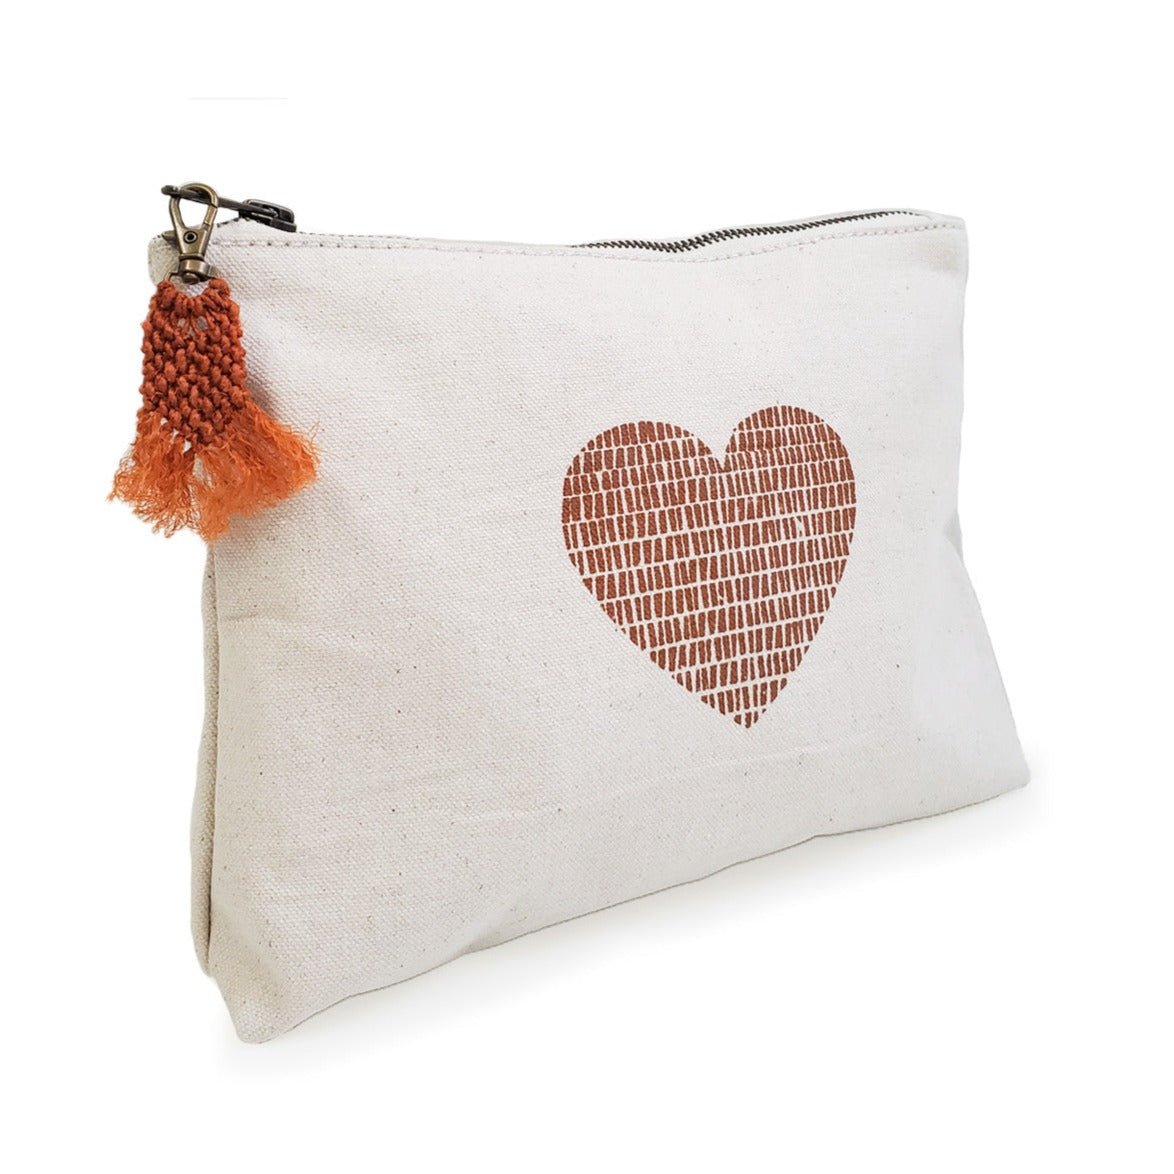 KORISSA Hand Screen Printed Cotton Canvas Pouch - Love - lily & onyx